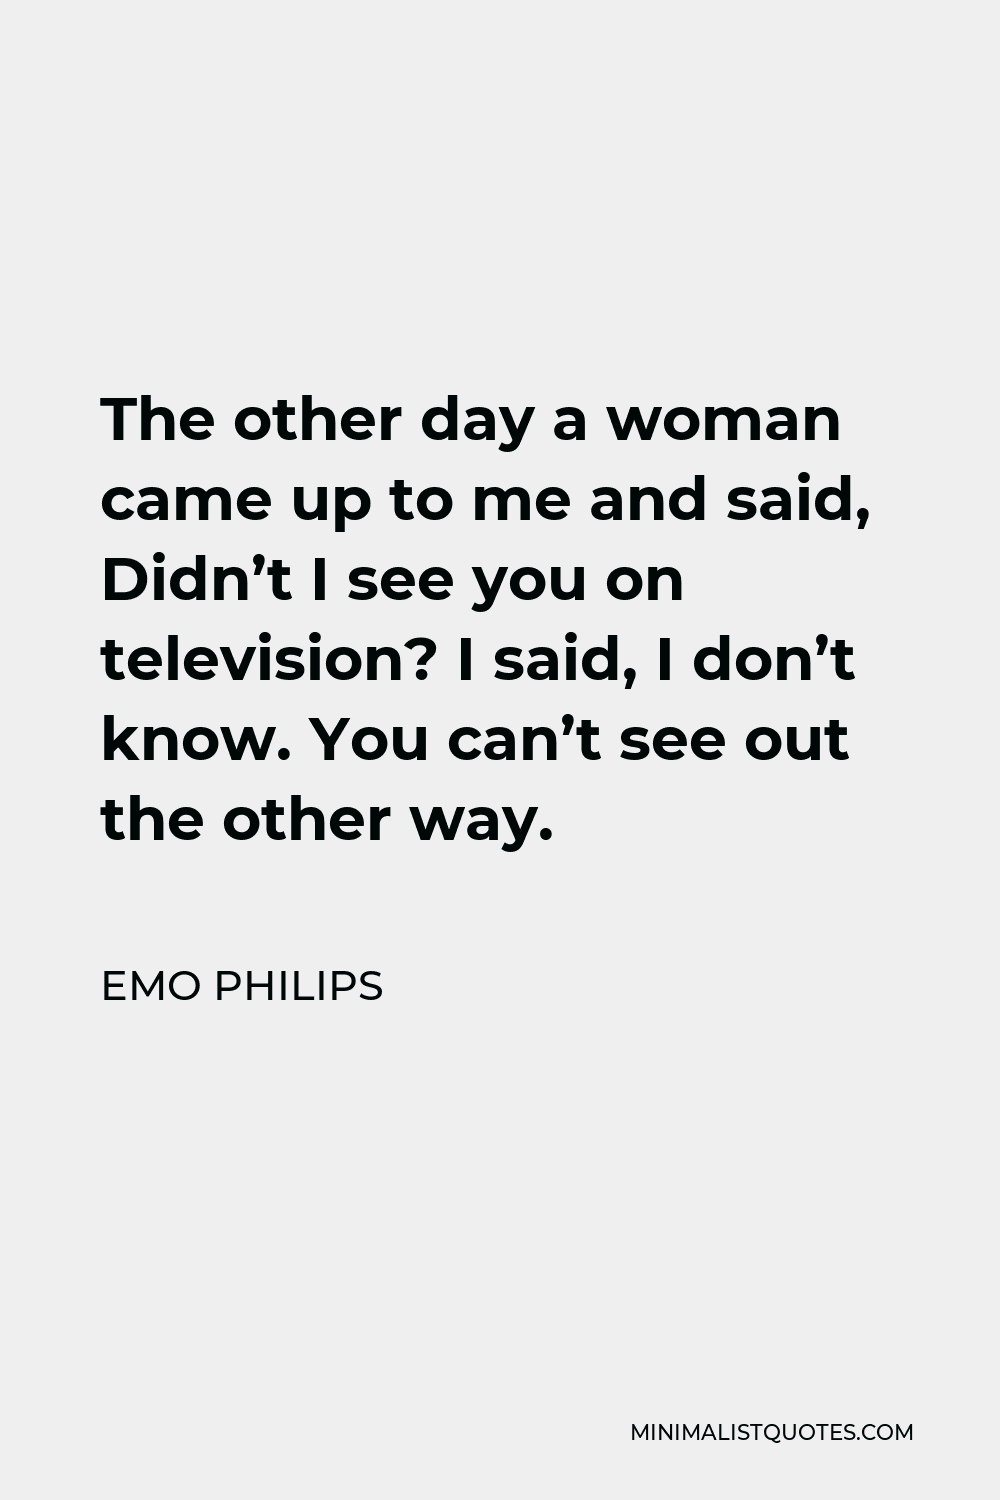 Emo Philips Quote - The other day a woman came up to me and said, Didn’t I see you on television? I said, I don’t know. You can’t see out the other way.